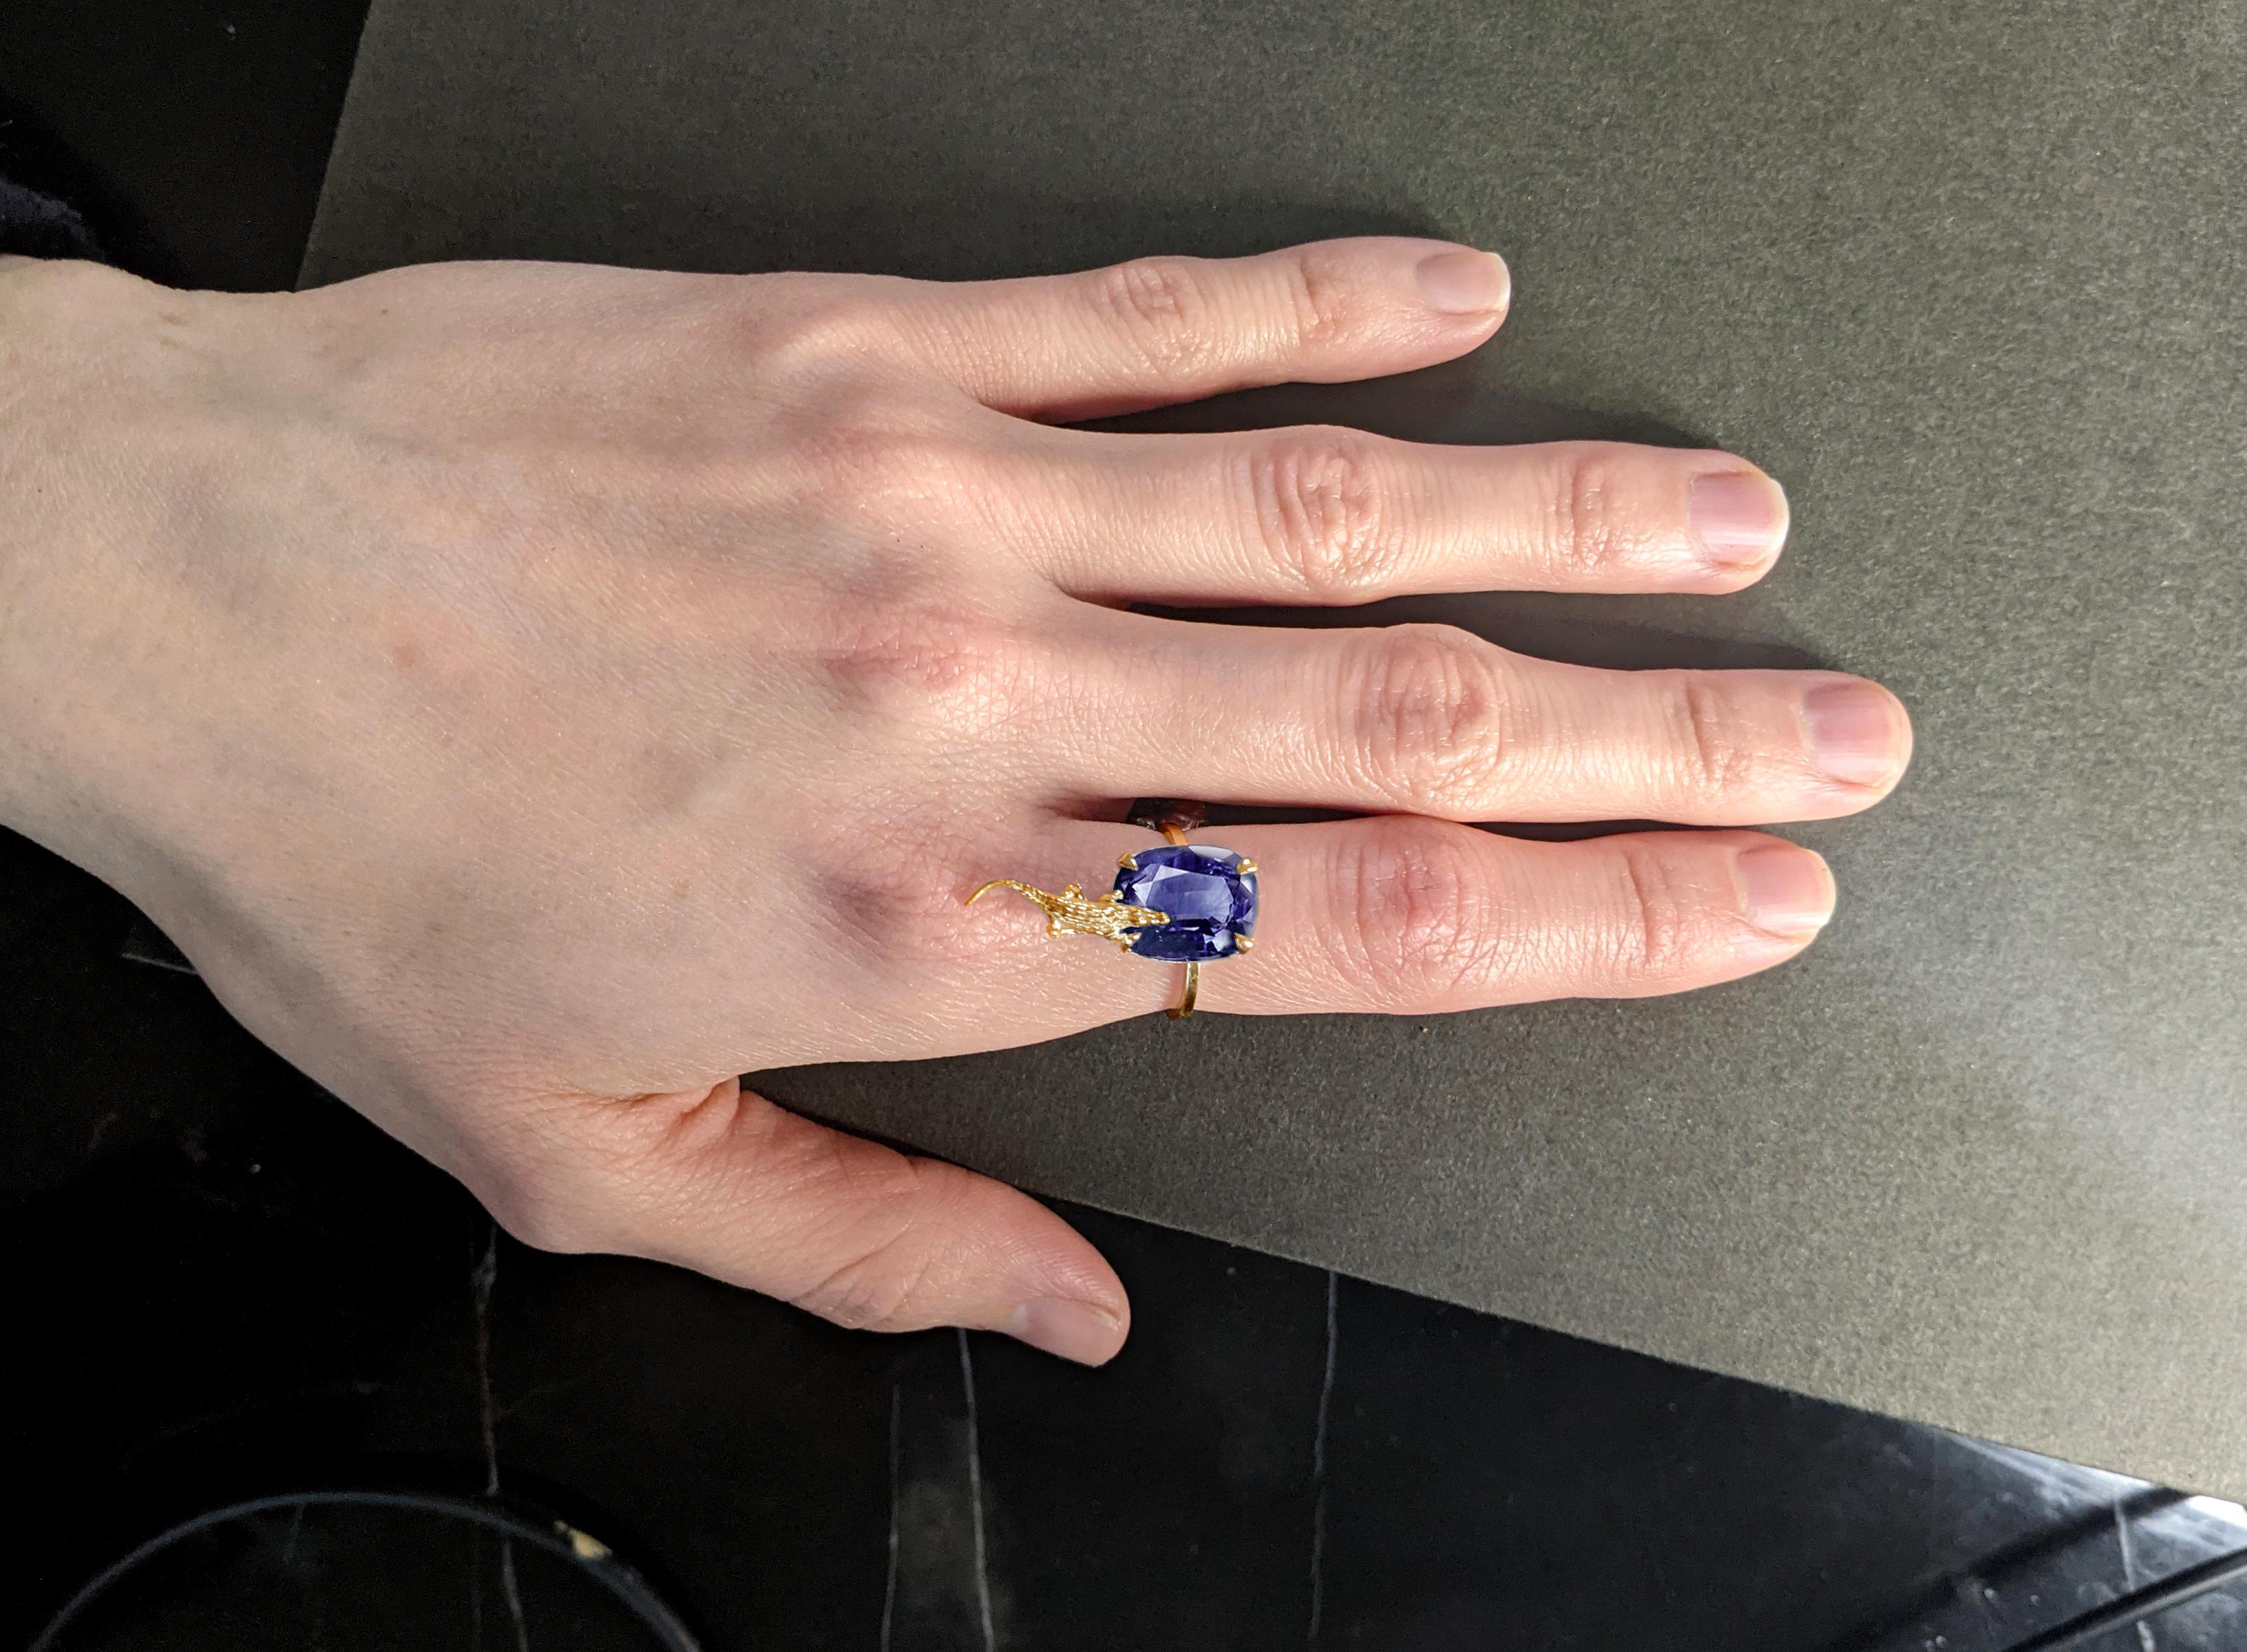 This contemporary Mesopotamian ring is made of 18 karat white gold and features a 2.14 carat natural cushion tanzanite measuring 9.3x6.8 mm. The exquisite gem catches the eye and is complemented by the sleek and modern design of the cocktail